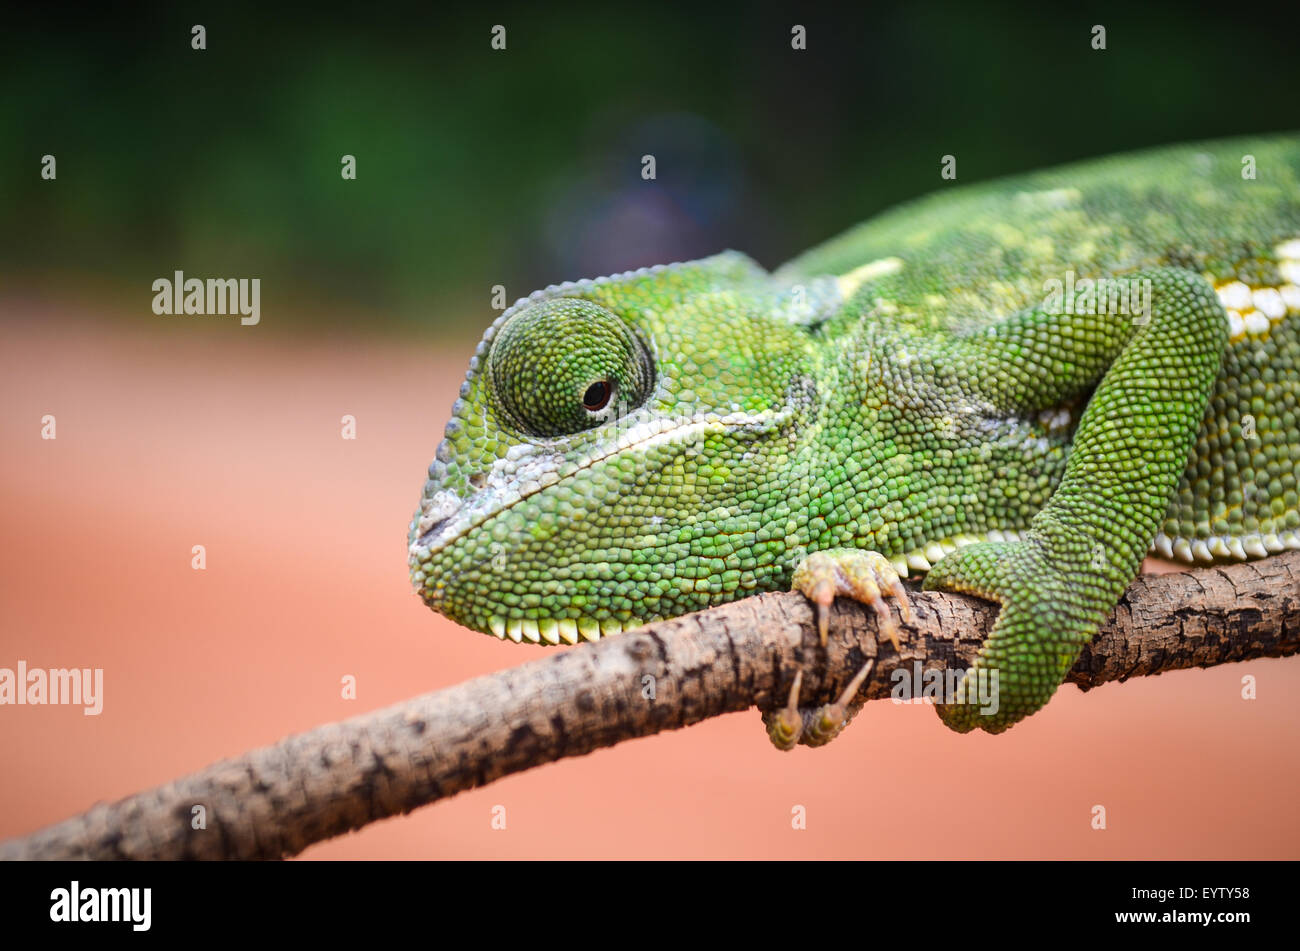 Chameleon looking down/backwards on a branch, holding it tight Stock Photo